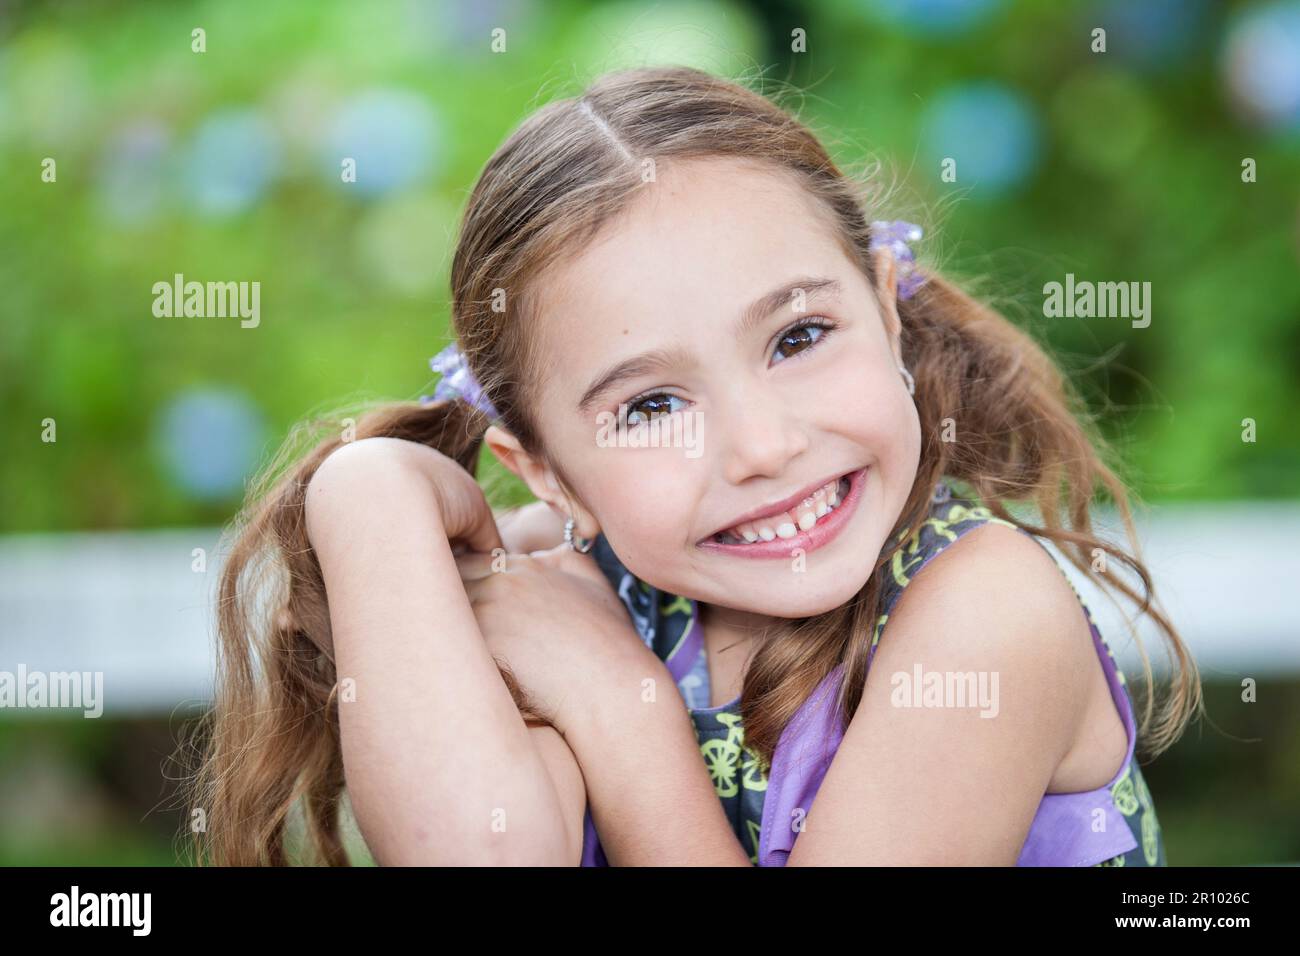 Sweet six years old blonde girl outdoors Stock Photo - Alamy